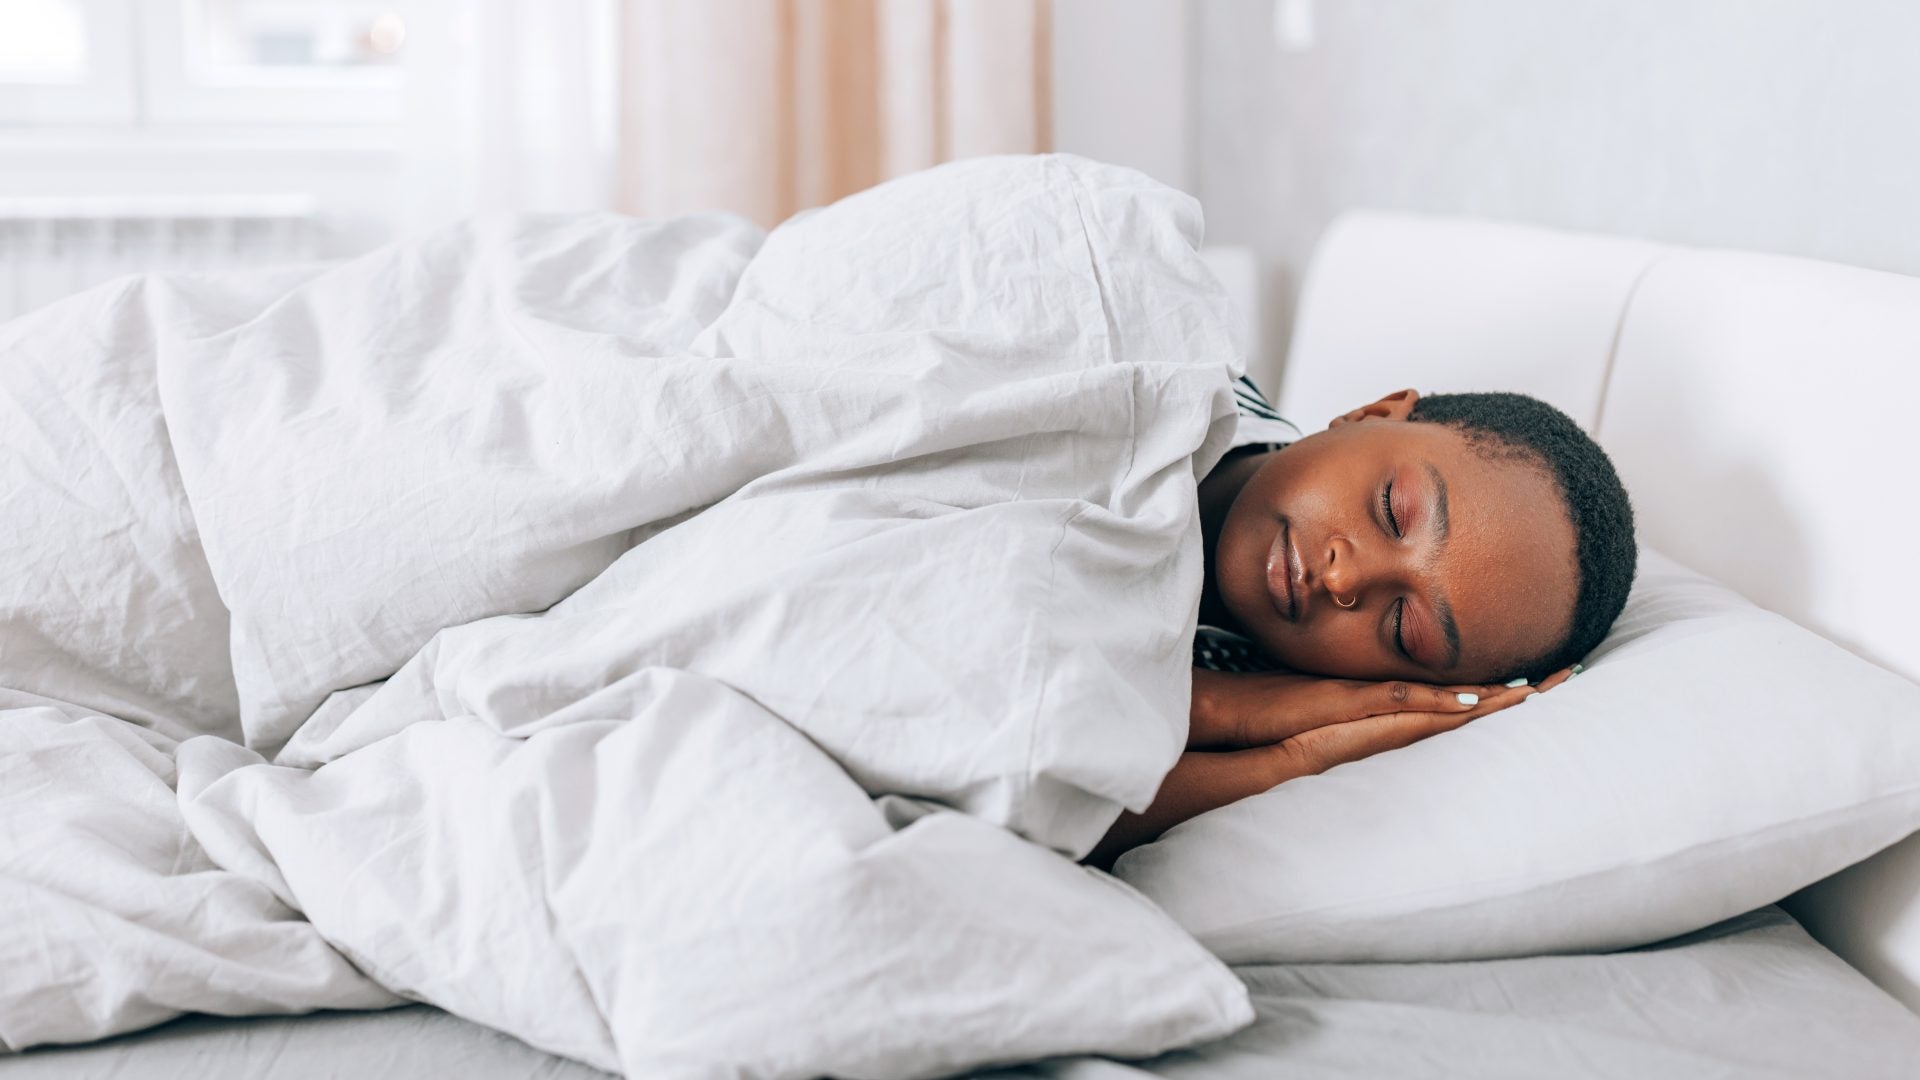 4 Easy Remedies To Stop Your Partner’s Snoring (So You Can Finally Sleep)